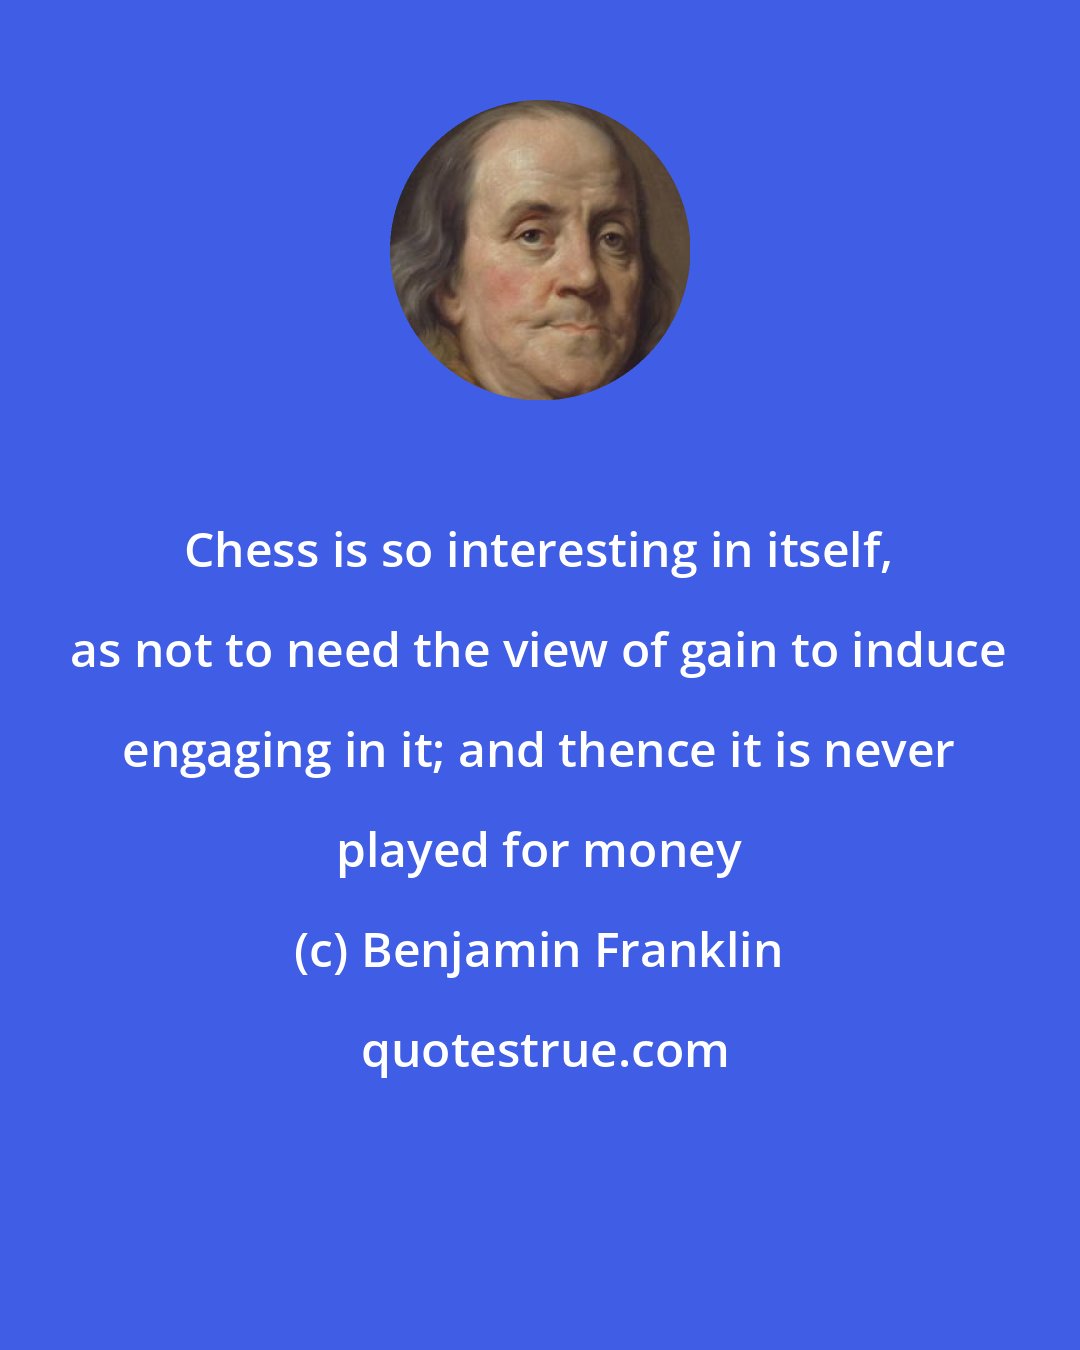 Benjamin Franklin: Chess is so interesting in itself, as not to need the view of gain to induce engaging in it; and thence it is never played for money